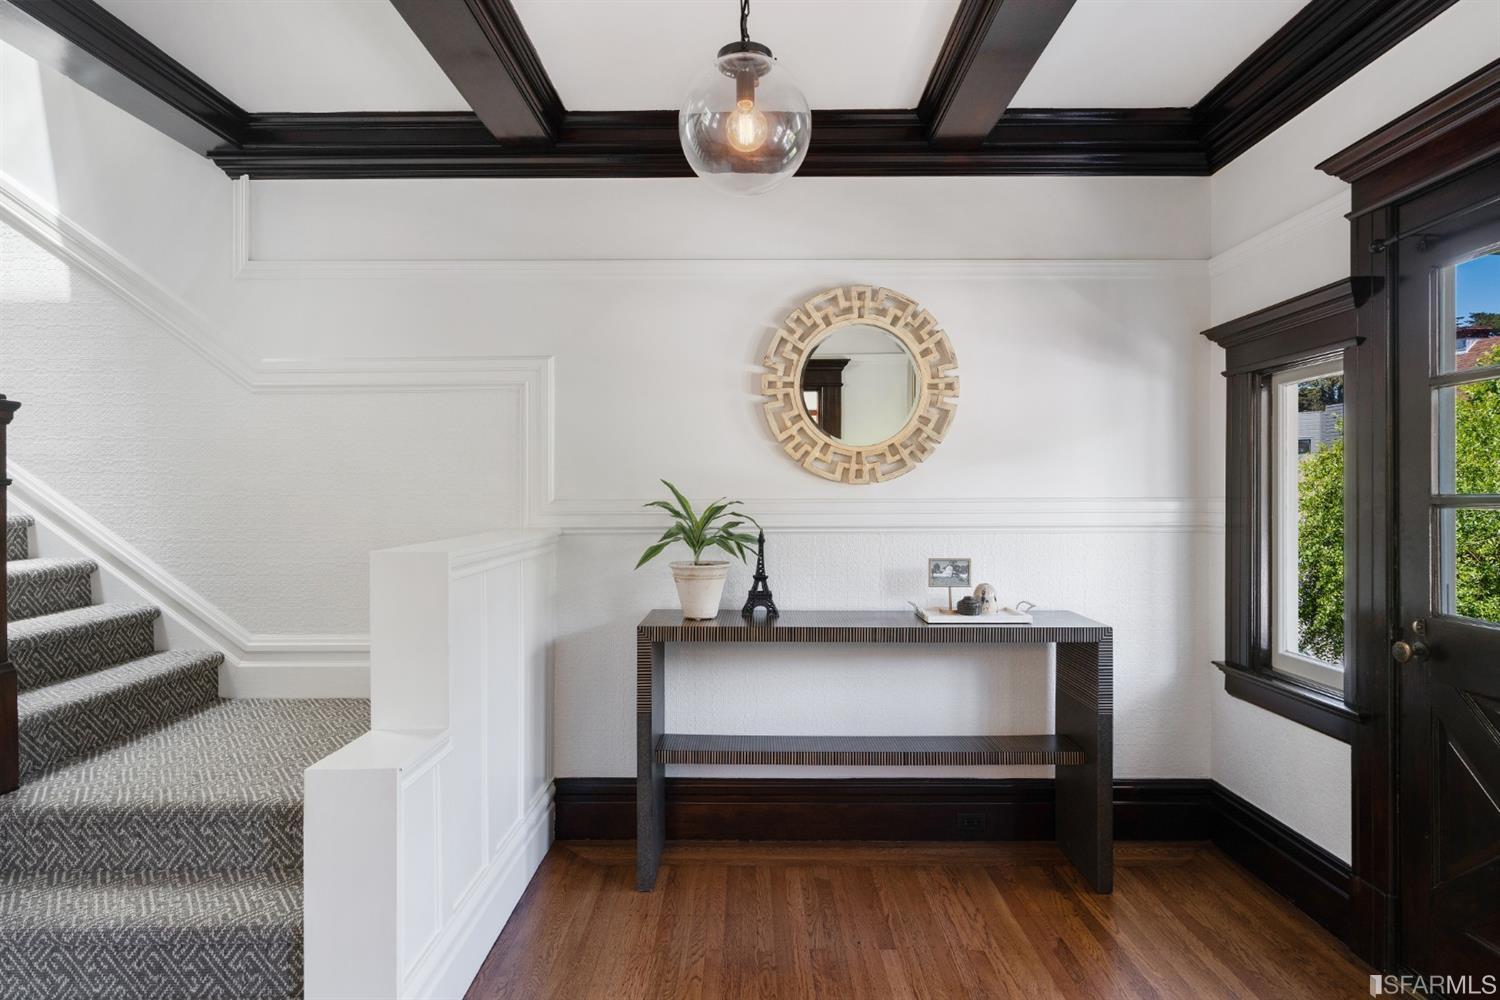 Property Photo: Foyer, showing wood floors and wood beamed ceilings 